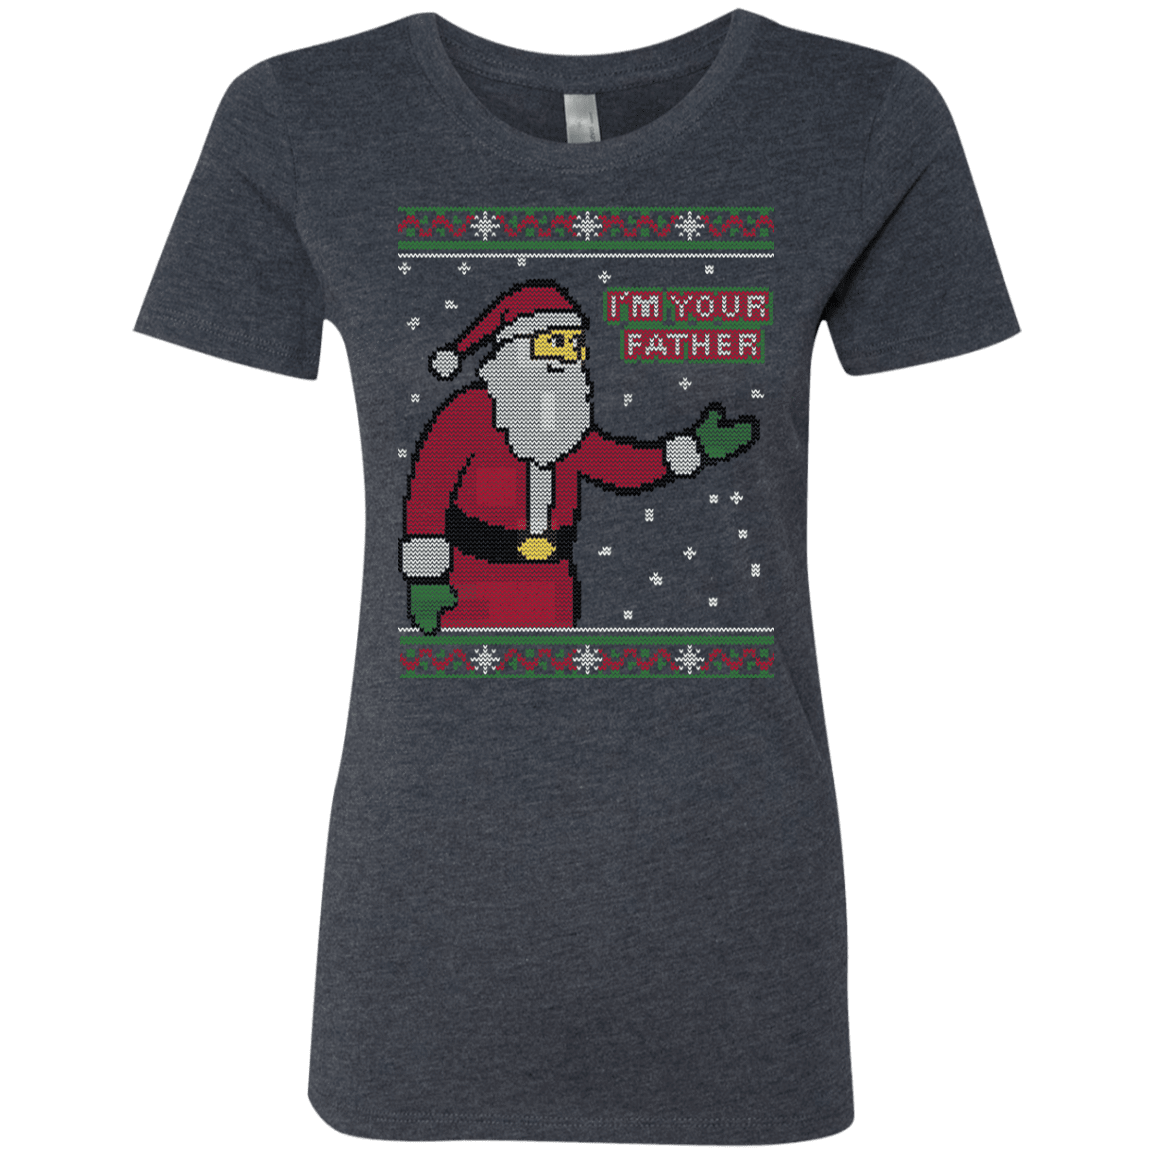 T-Shirts Vintage Navy / Small Spoiler Christmas Sweater Women's Triblend T-Shirt